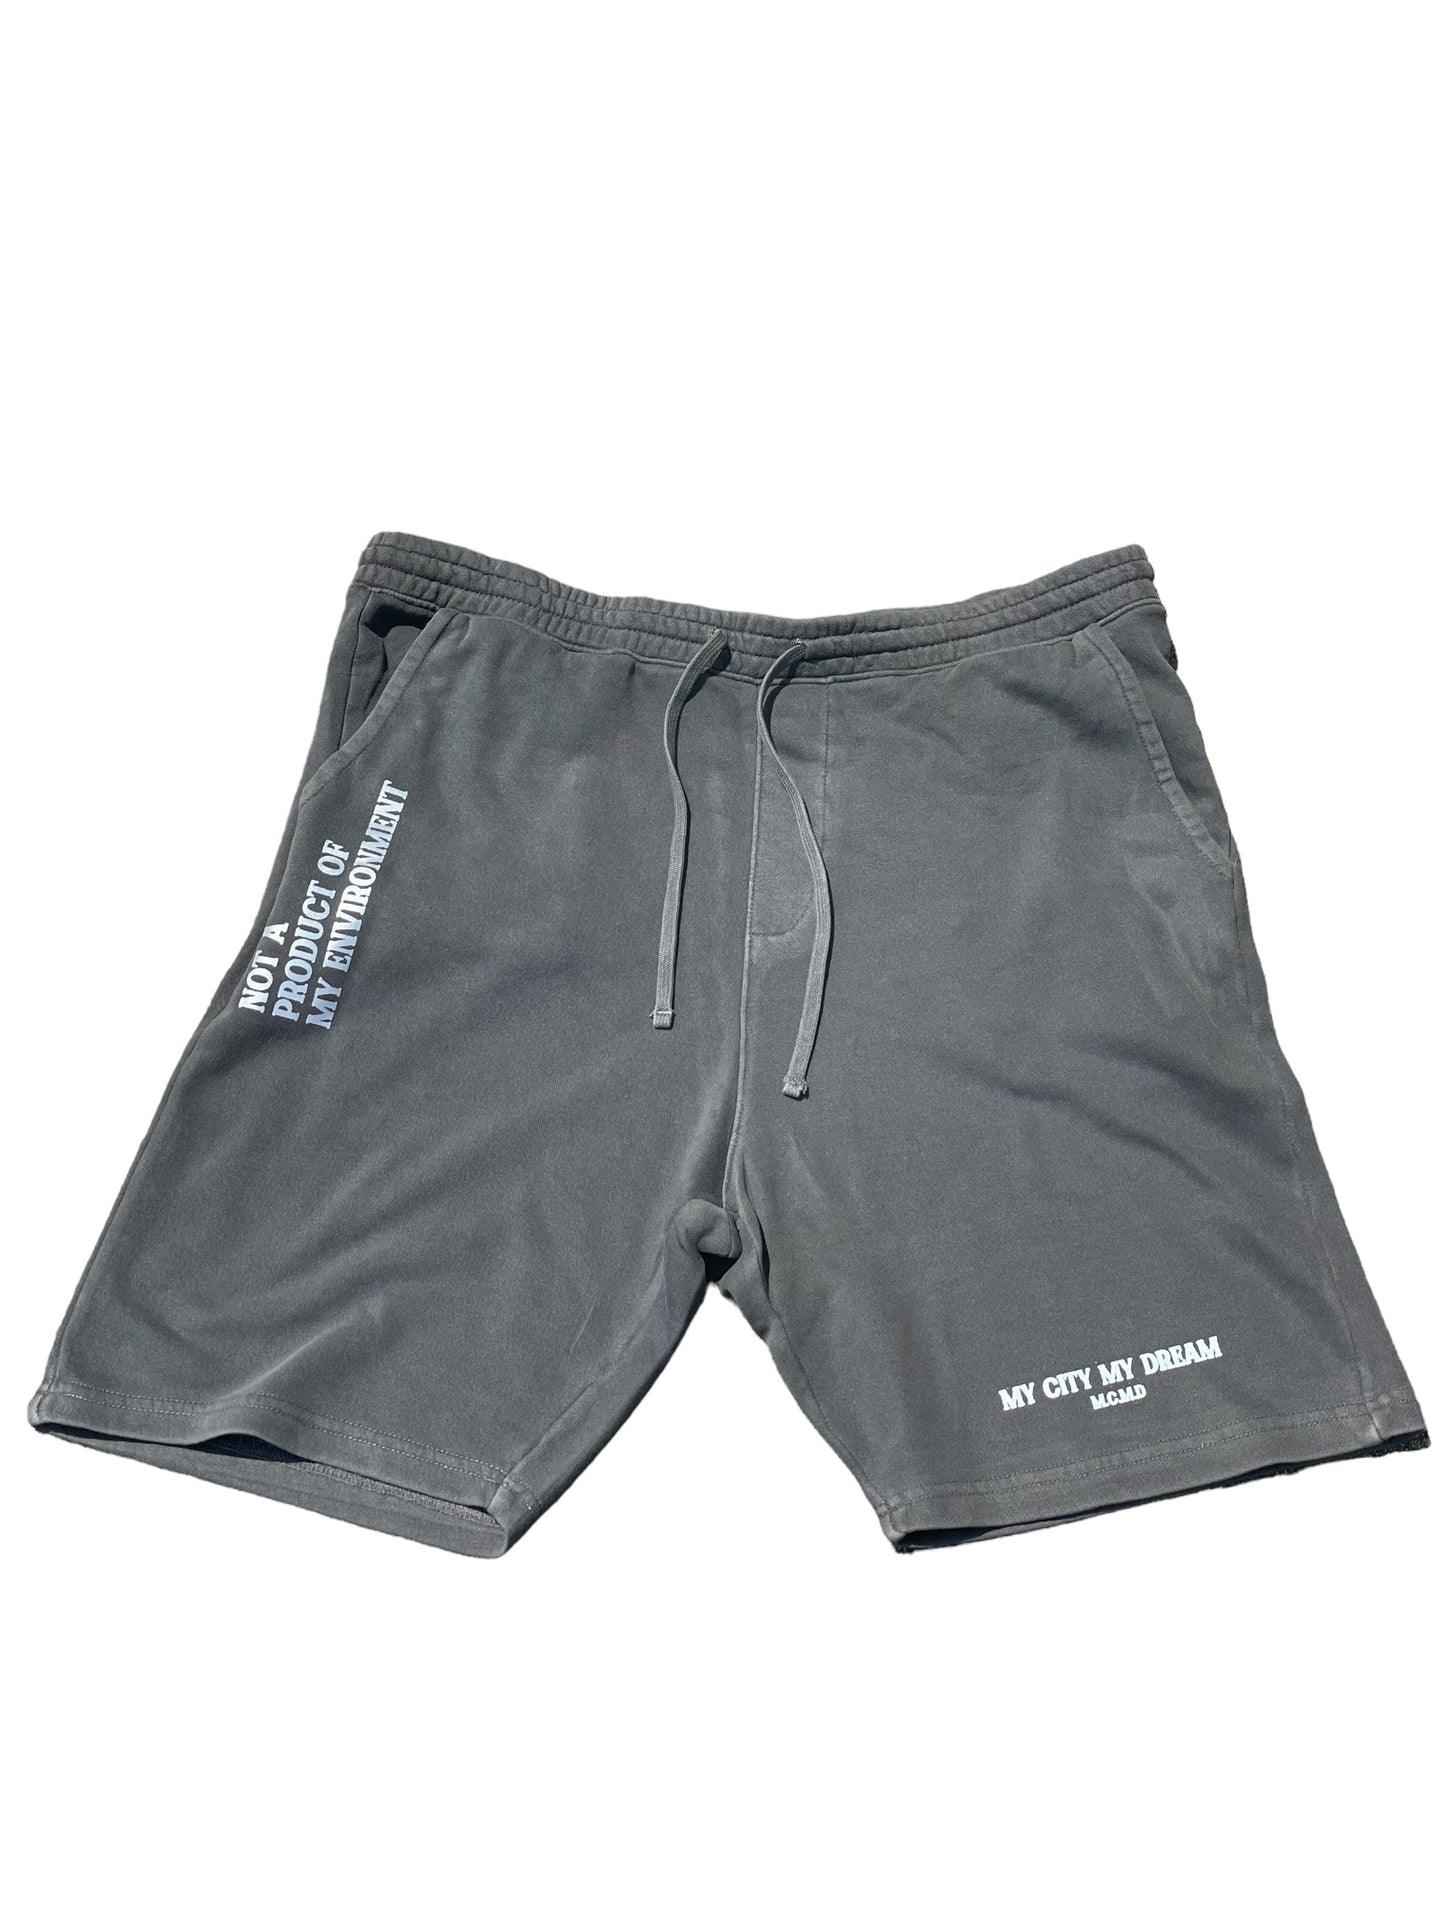 Not A Product Reflective Short